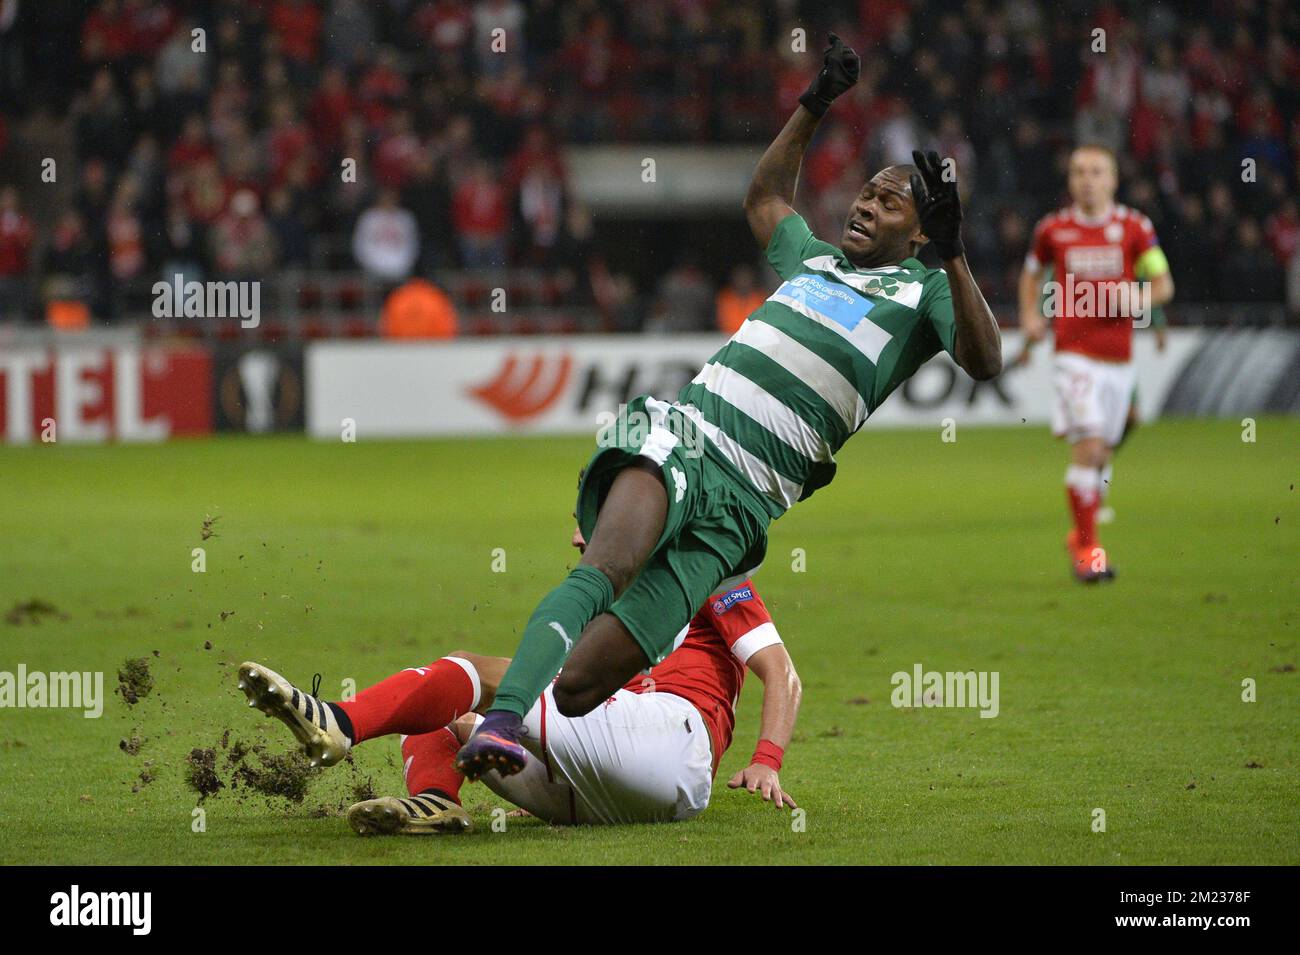 Panathinaikos' forward Victor Ibarbo and Standard's Konstantinos Laifis fight for the ball during a third game of the group stage (group G) of the Europa League competition between Belgian soccer team Standard de Liege and Greek soccer team Panathinaikos, Thursday 20 October 2016, in Liege. BELGA PHOTO NICOLAS LAMBERT Stock Photo